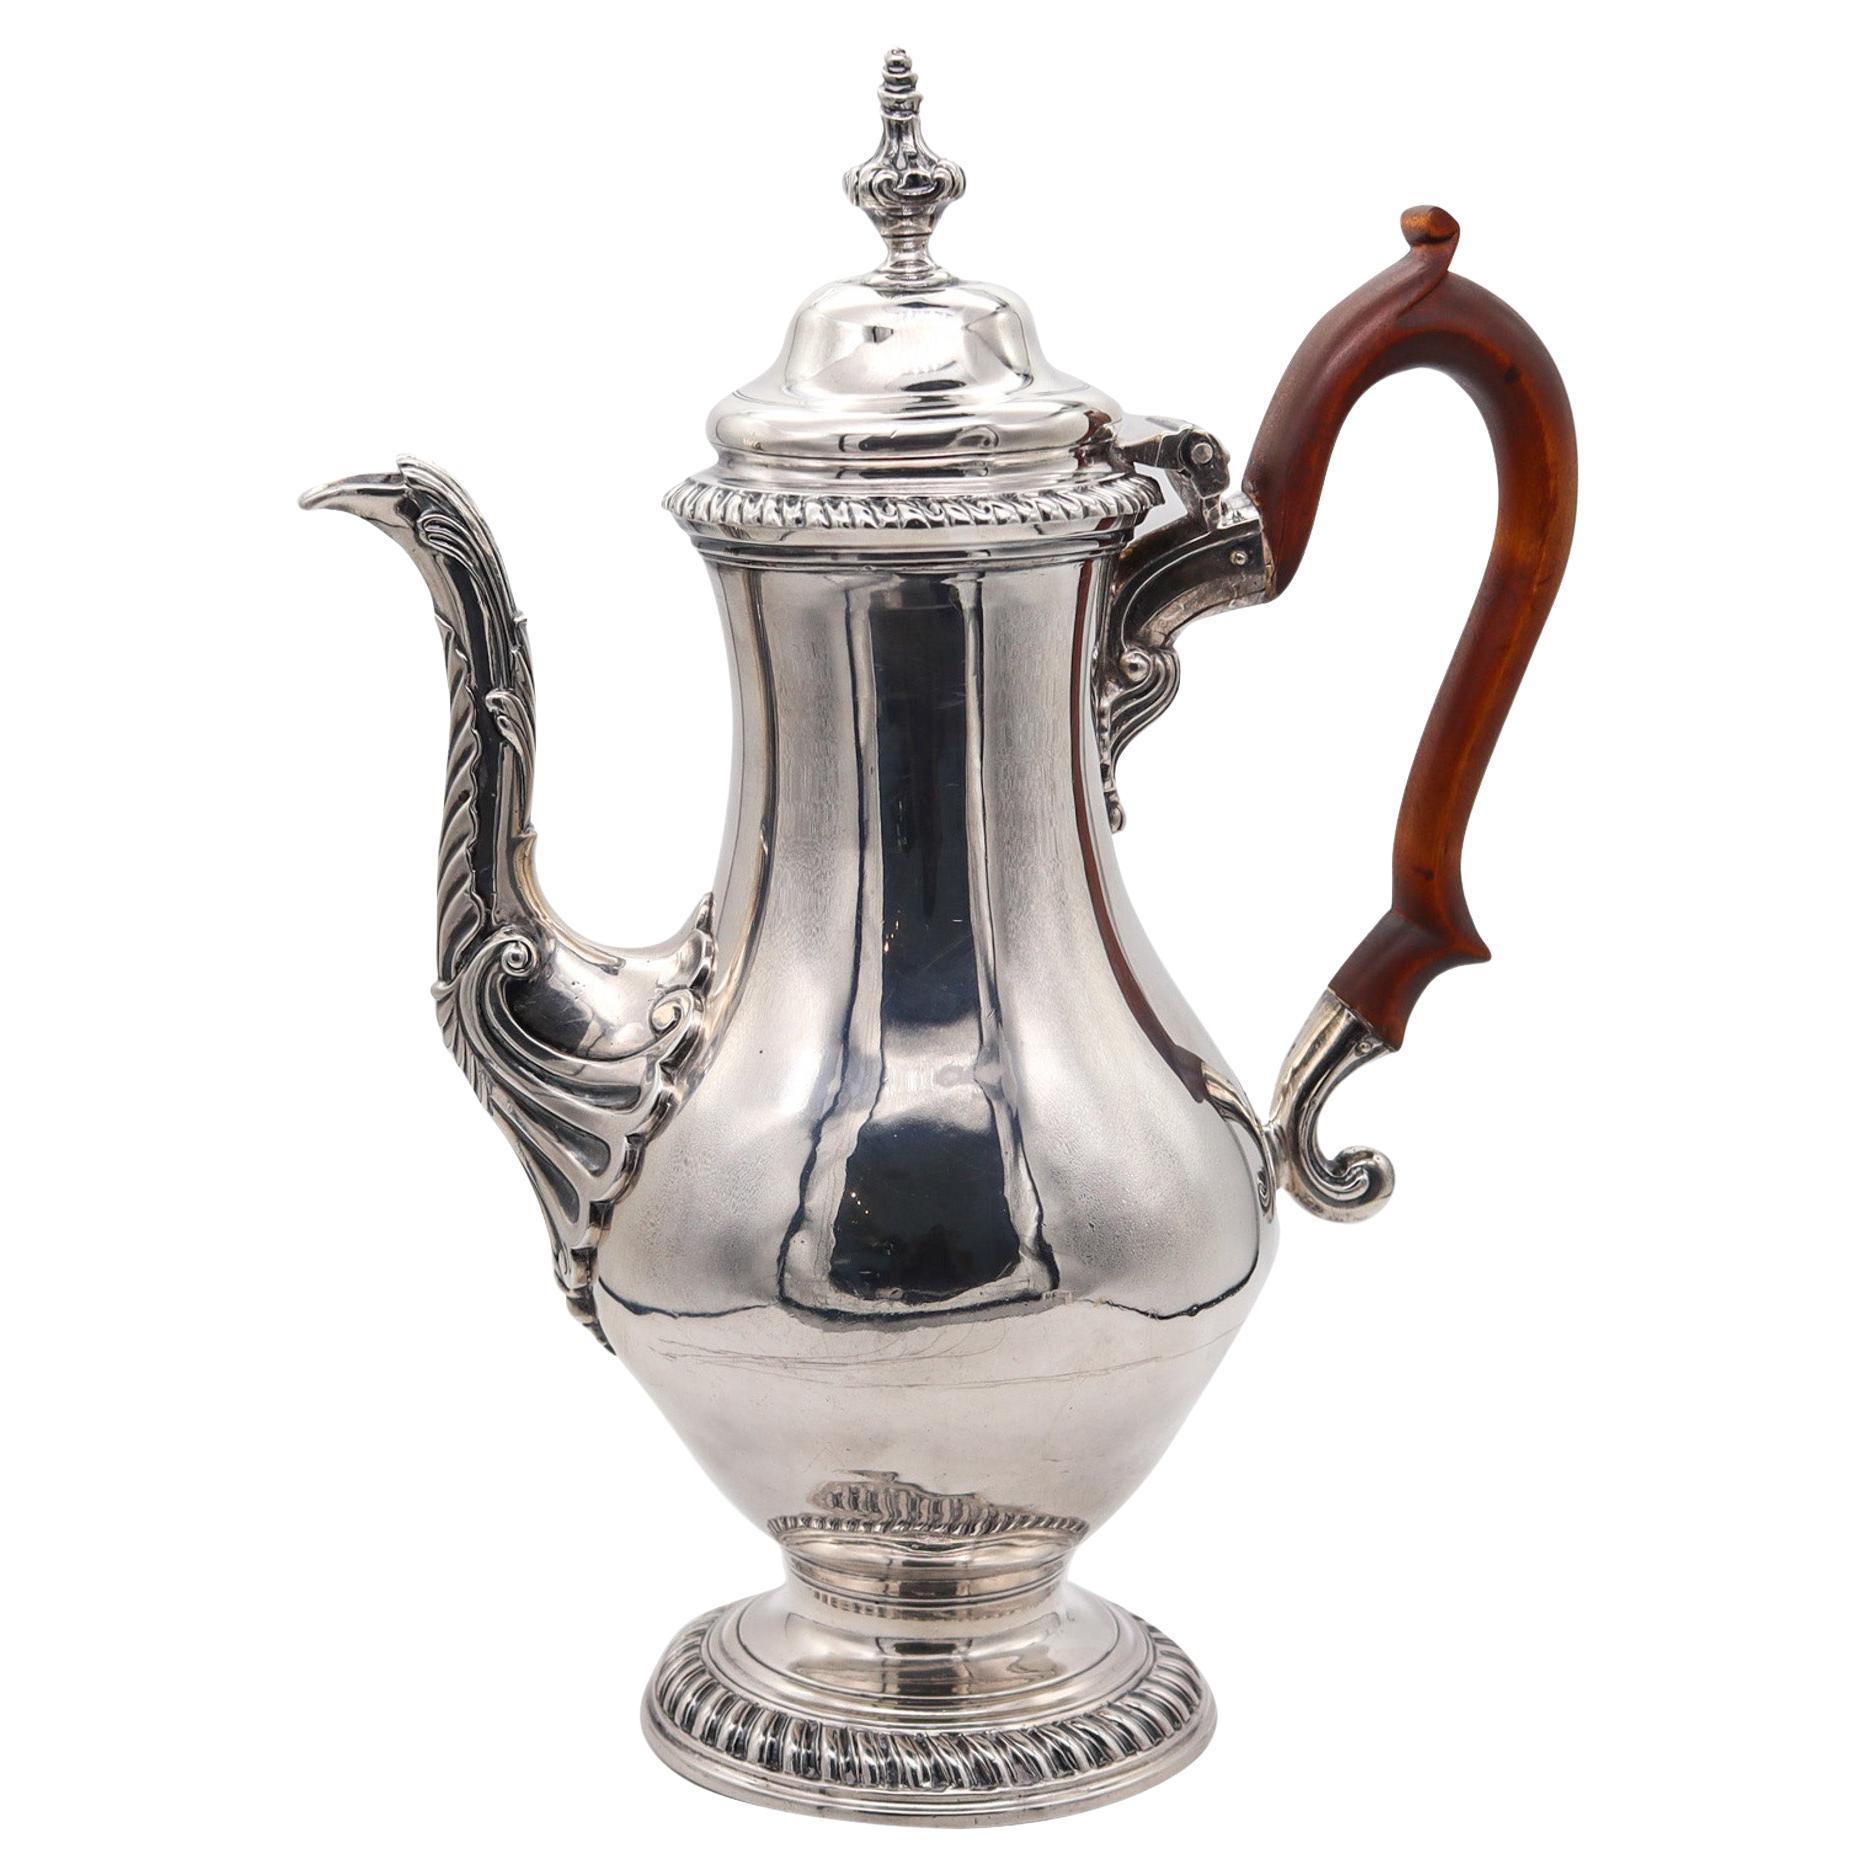 Jacob Marsh 1766 London Coffee Pot In .925 Sterling Silver And Carved Wood For Sale